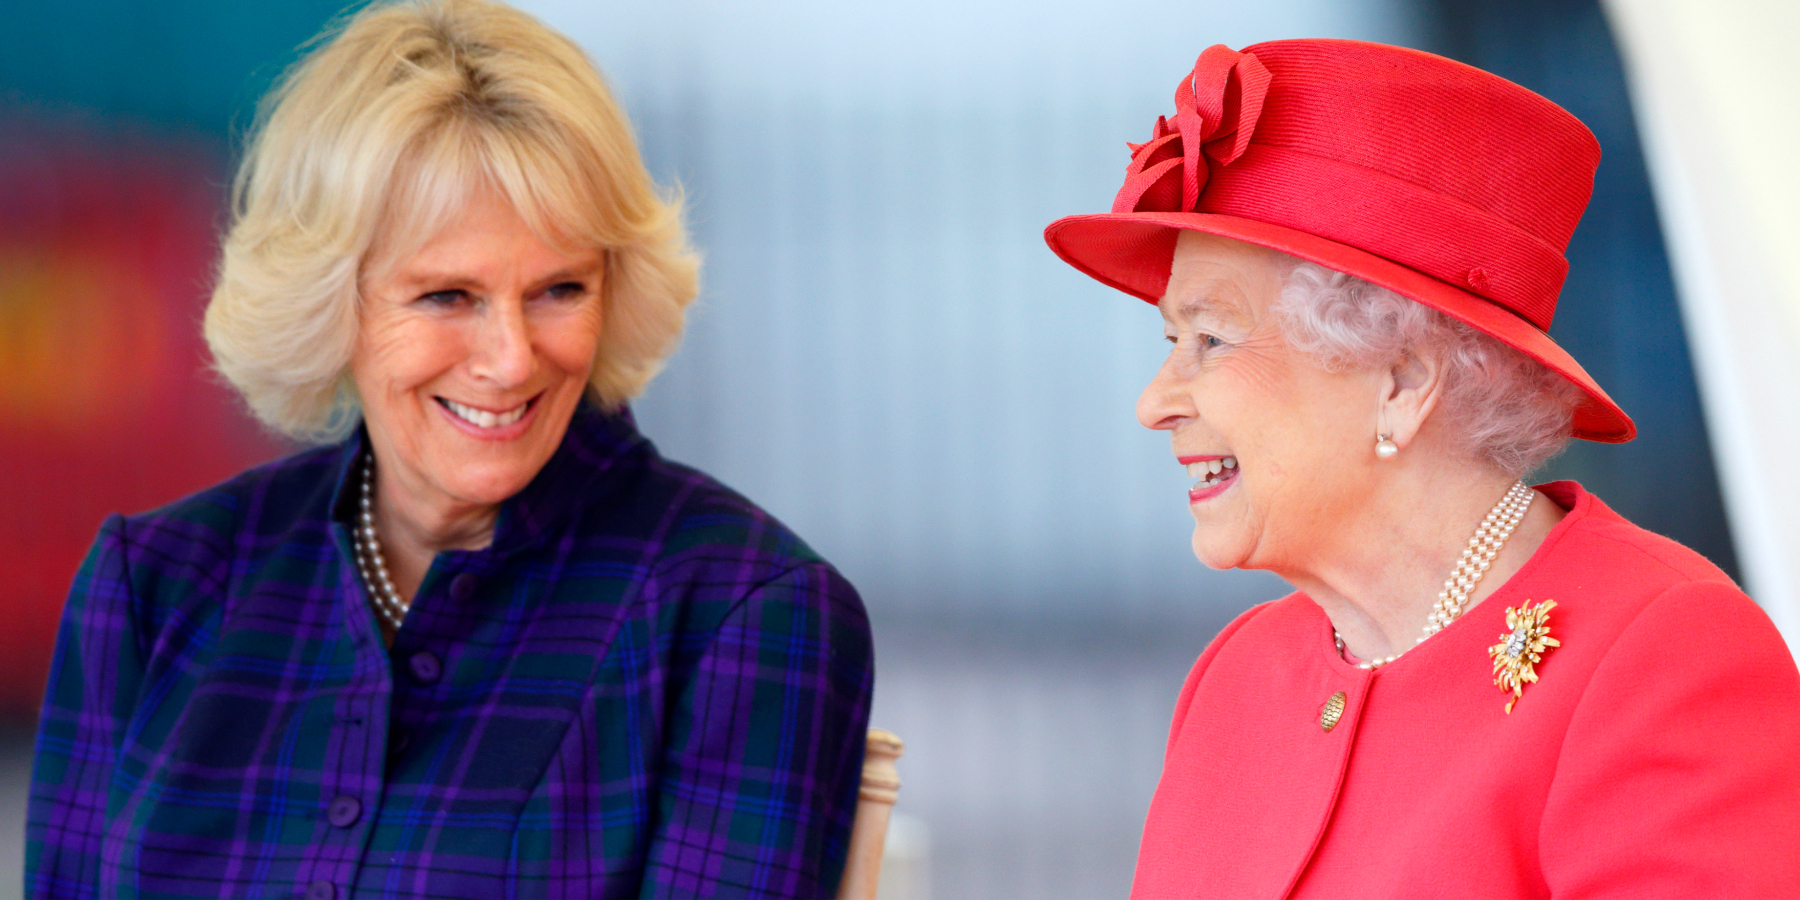 Camilla Parker Bowles May End One of Queen Elizabeth’s Most Treasured Traditions, Says Royal Historian